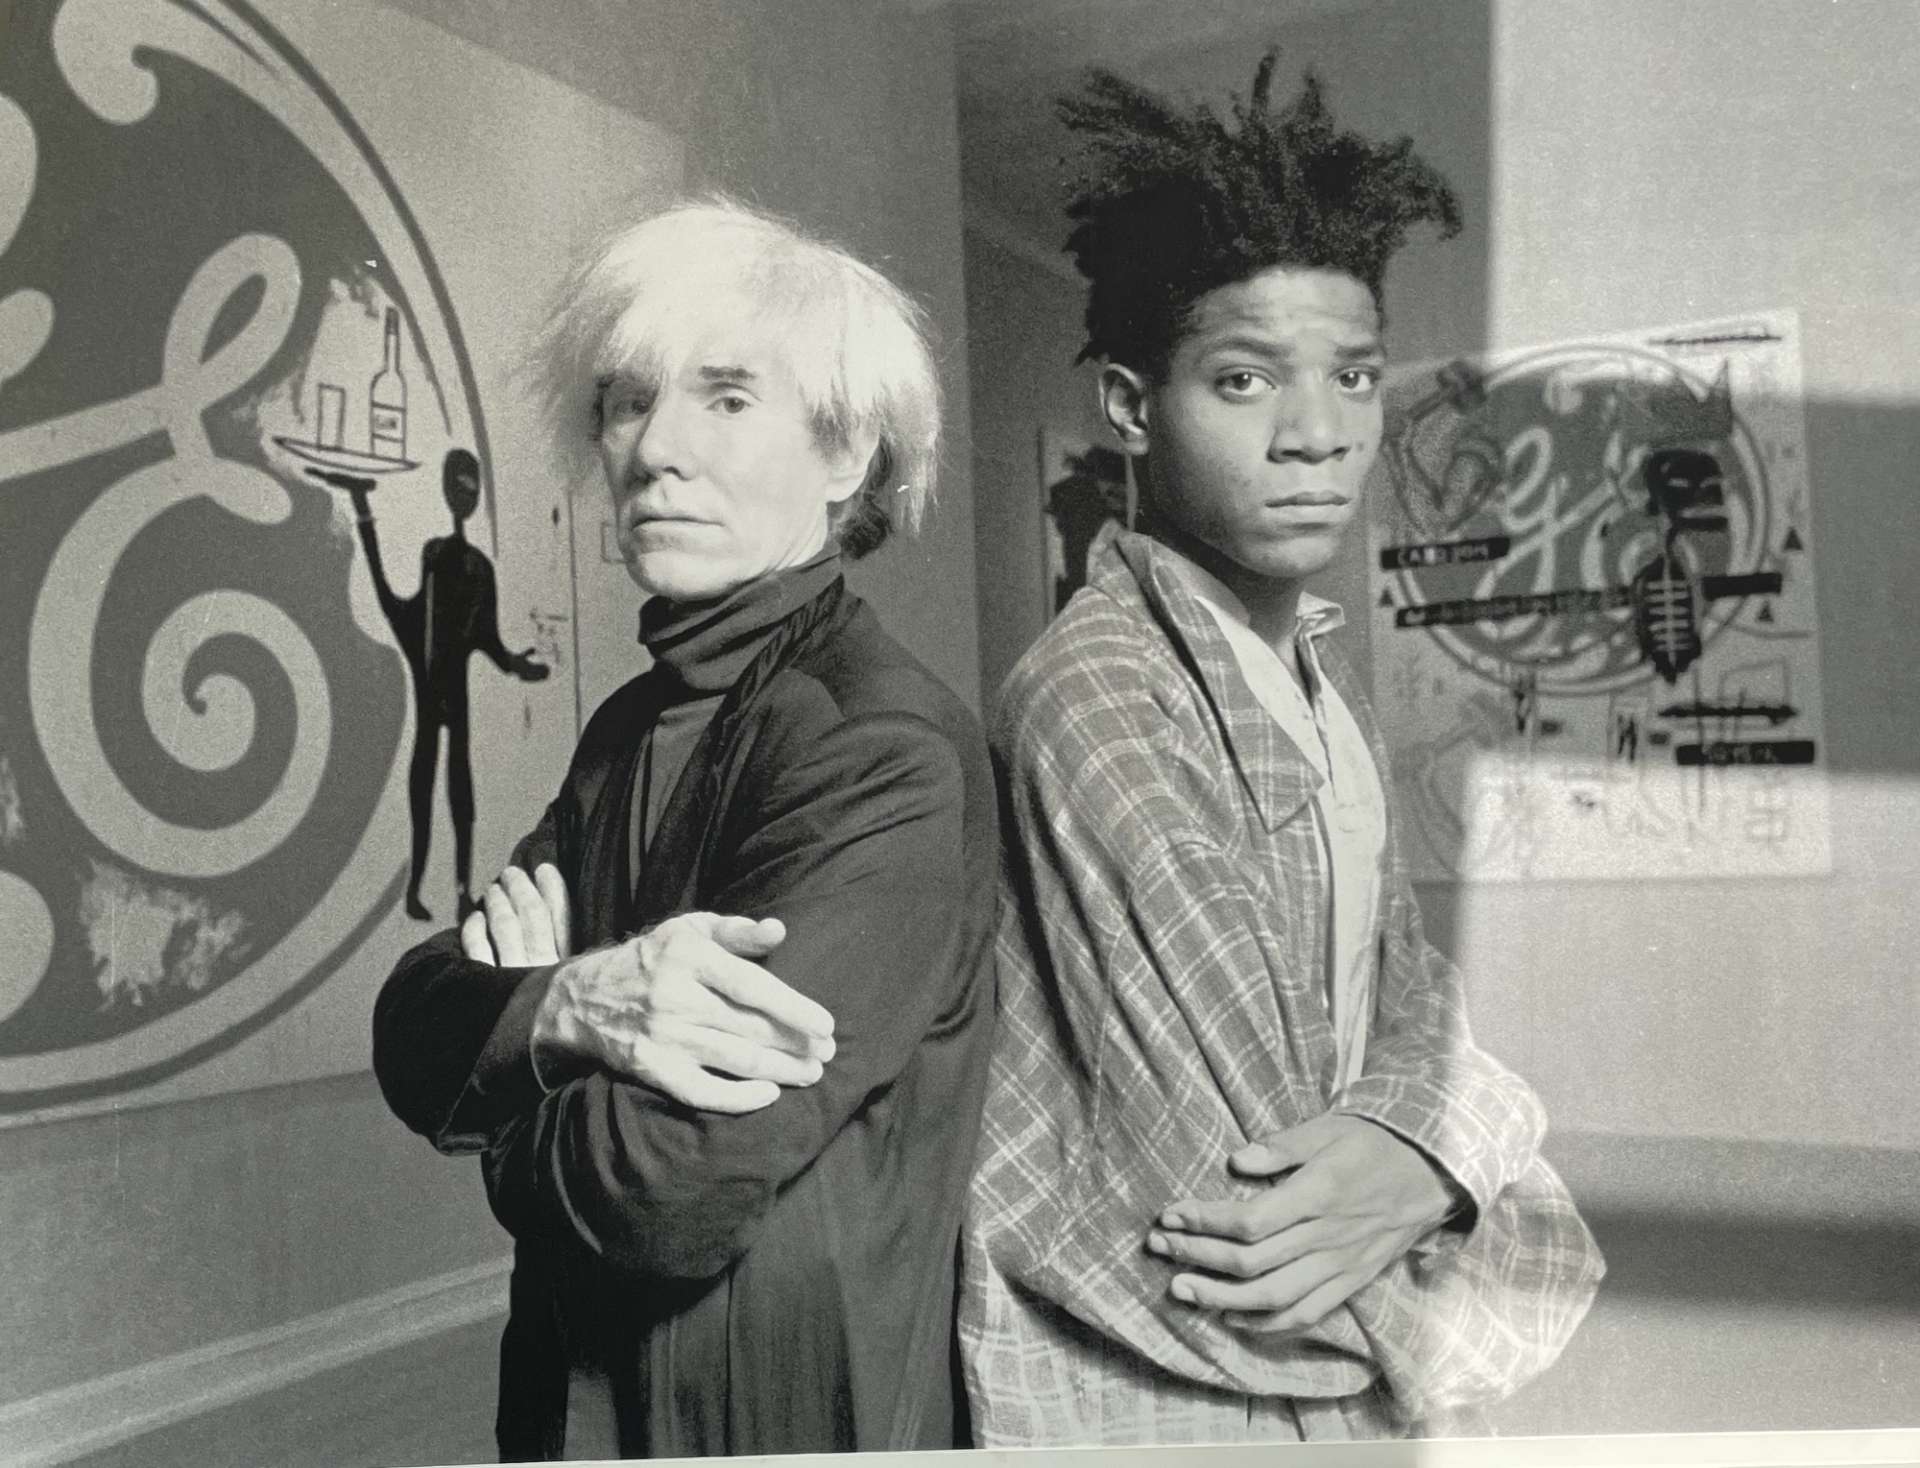 Black and white picture of Andy Warhol and Jean-Michele Basquiat